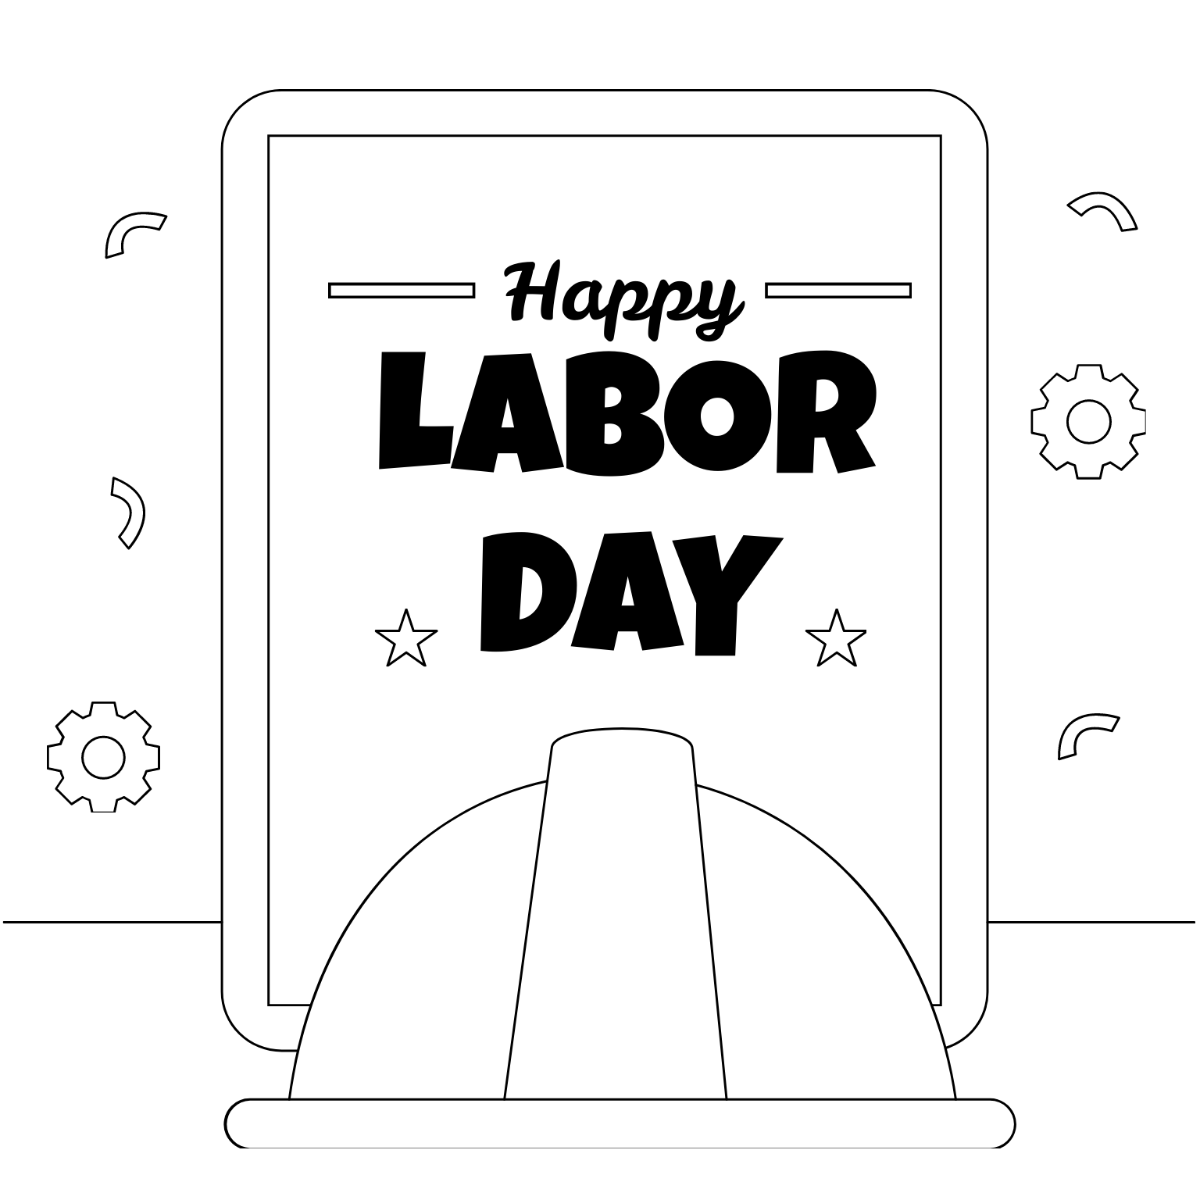 FREE Labor Day - Edit Online & Download | Template.net